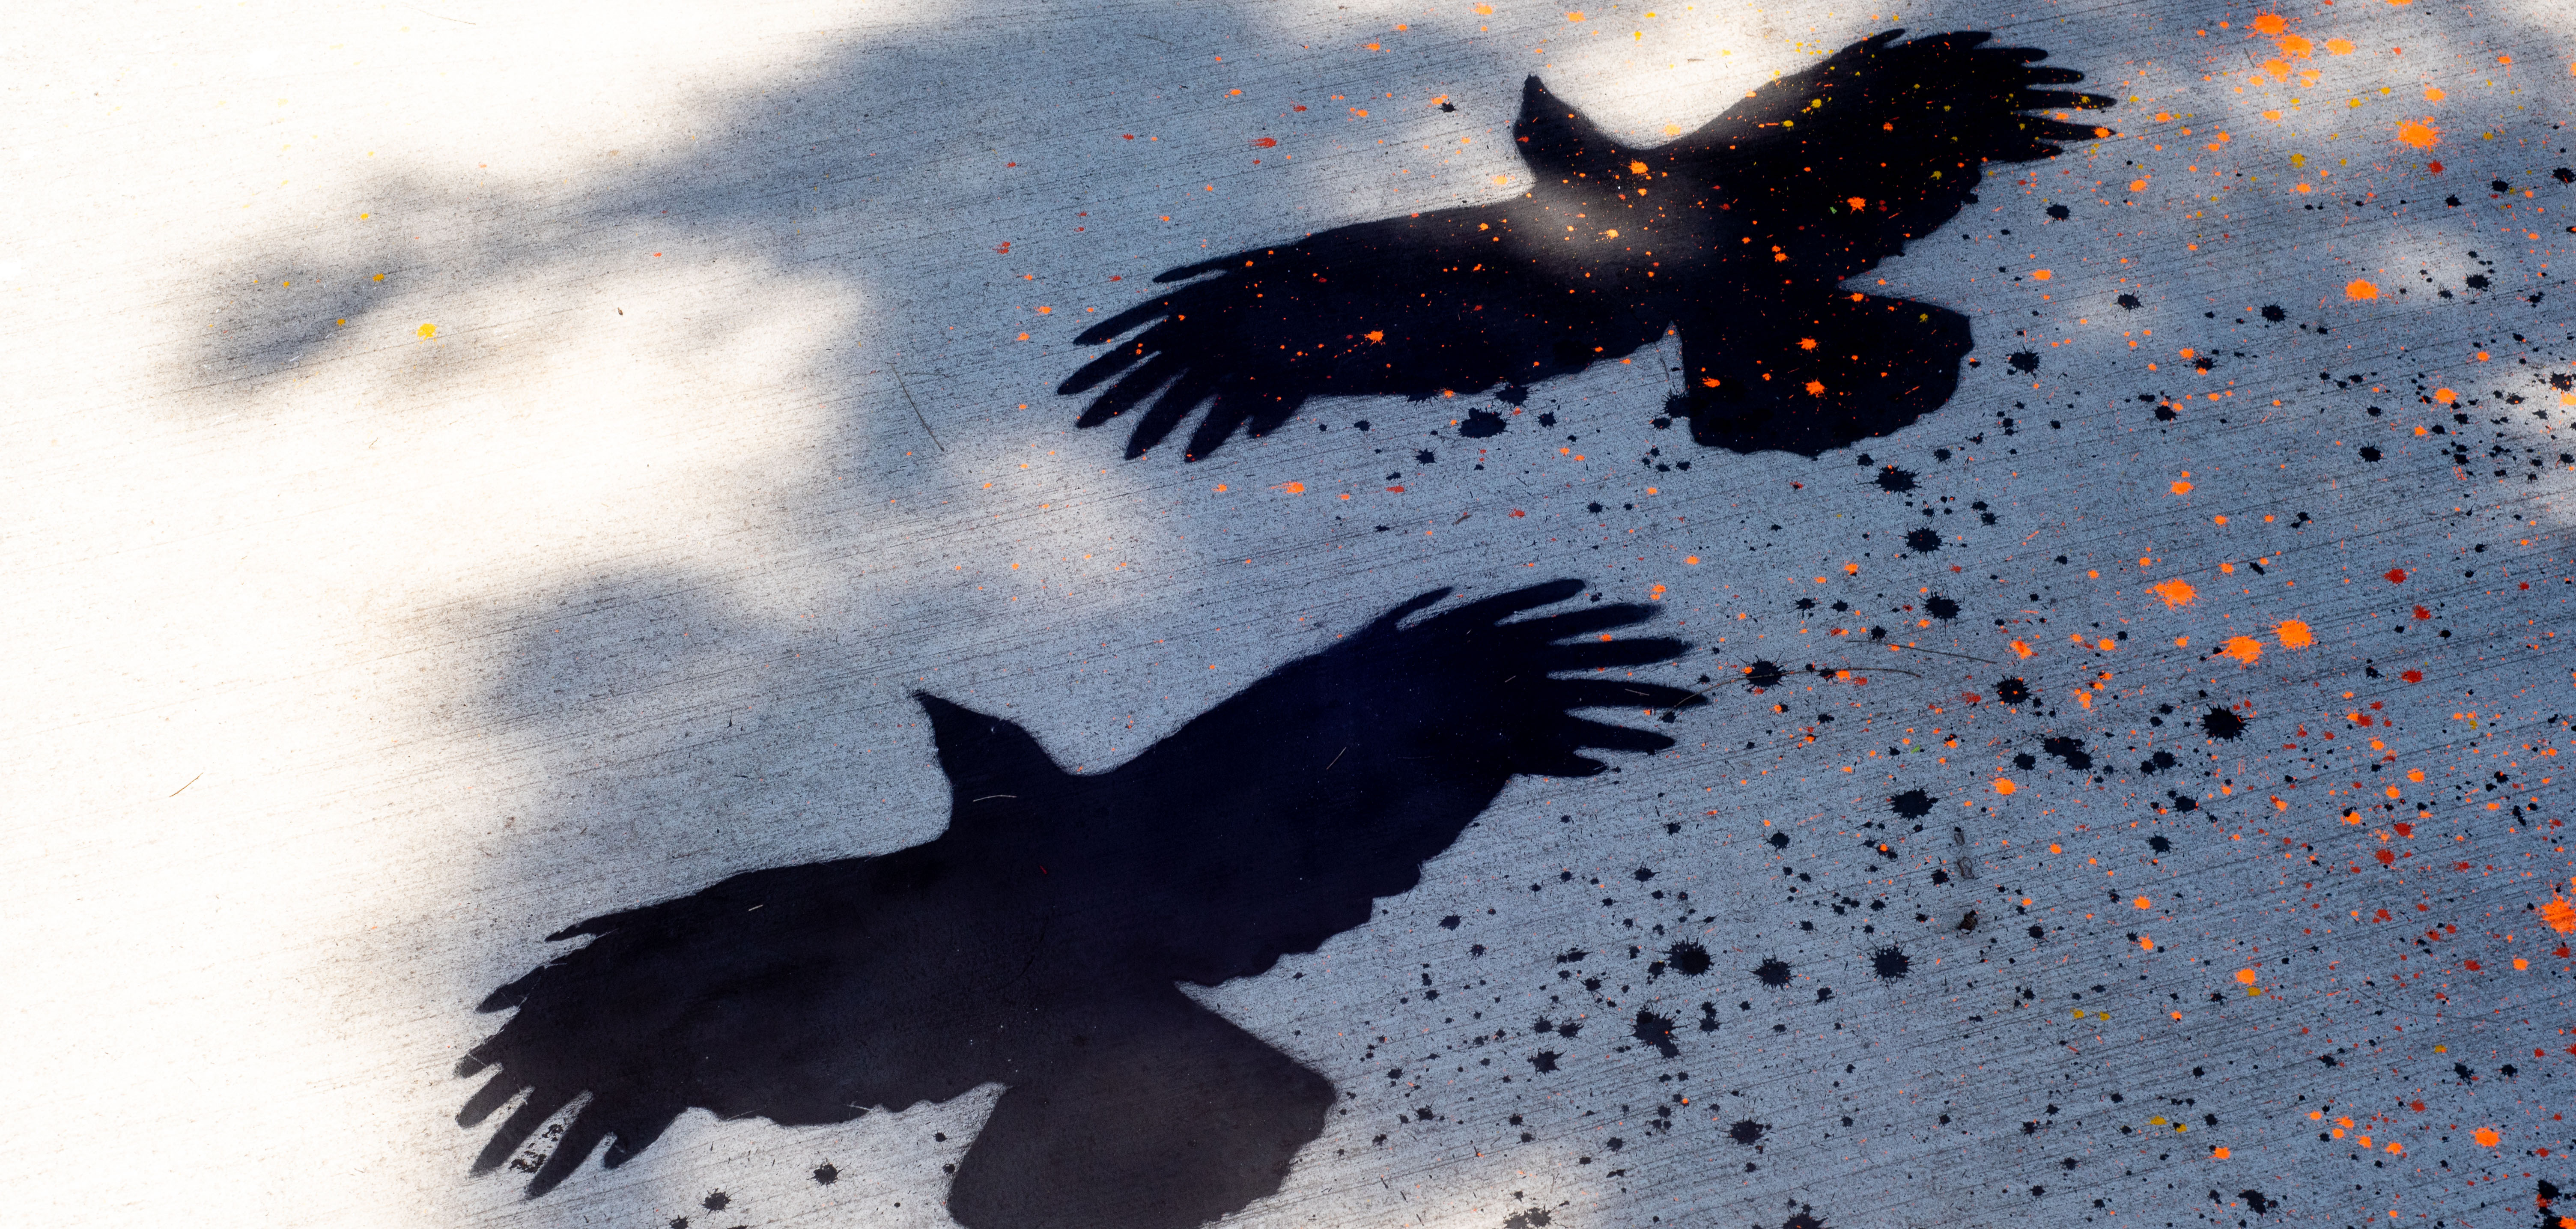 A stencil of two black birds interspersed with paint splatter on a concrete surface